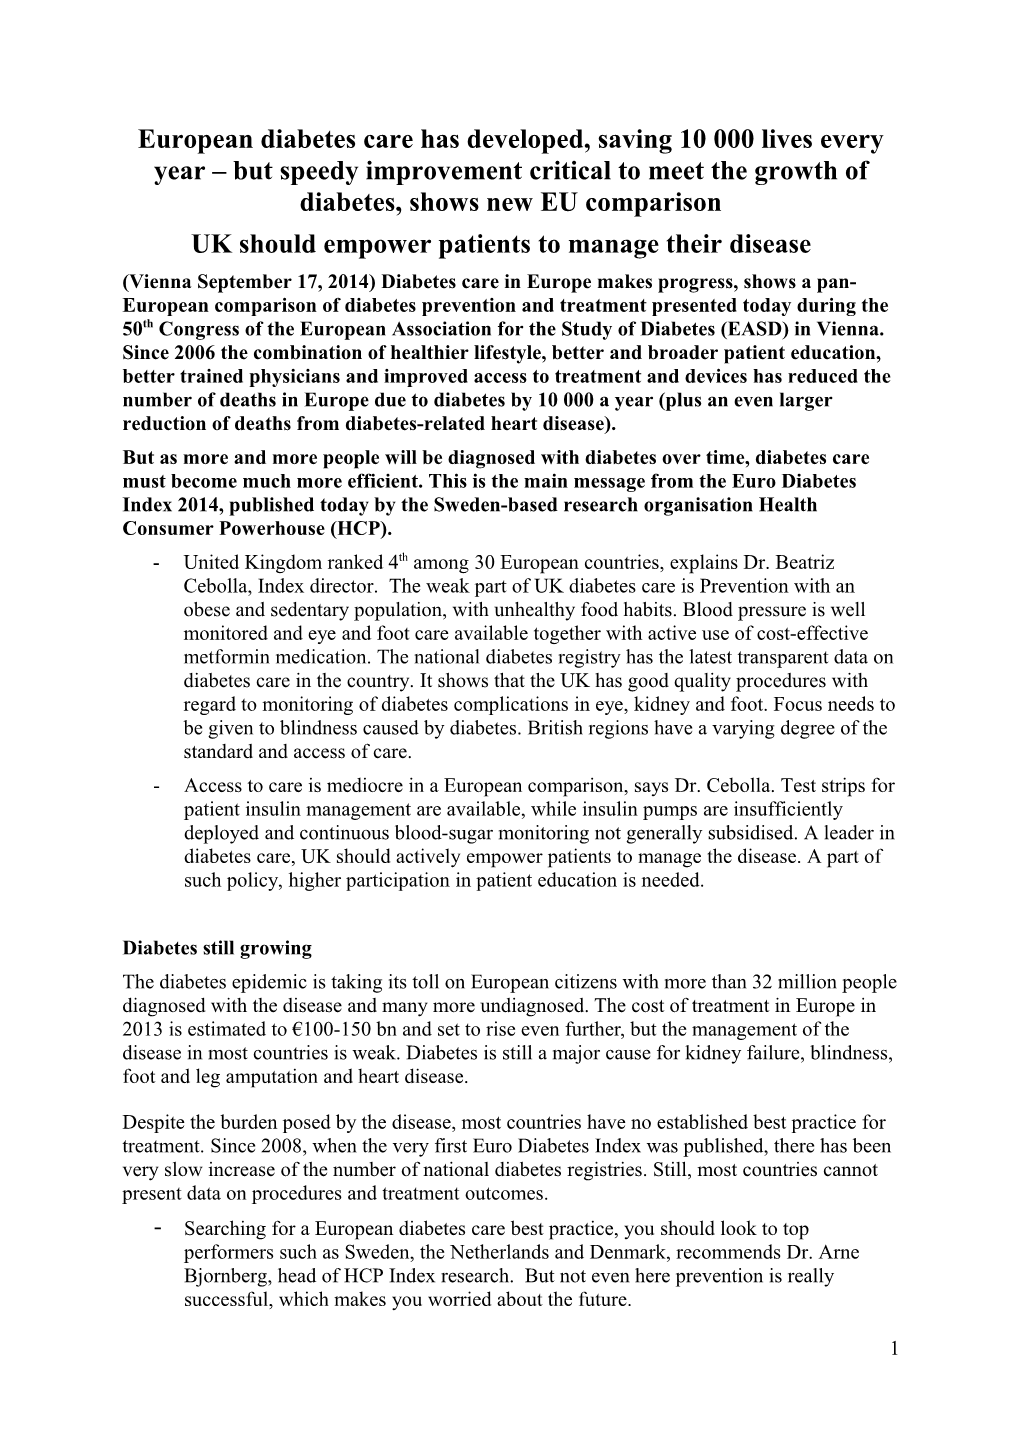 UK Should Empower Patients to Manage Their Disease